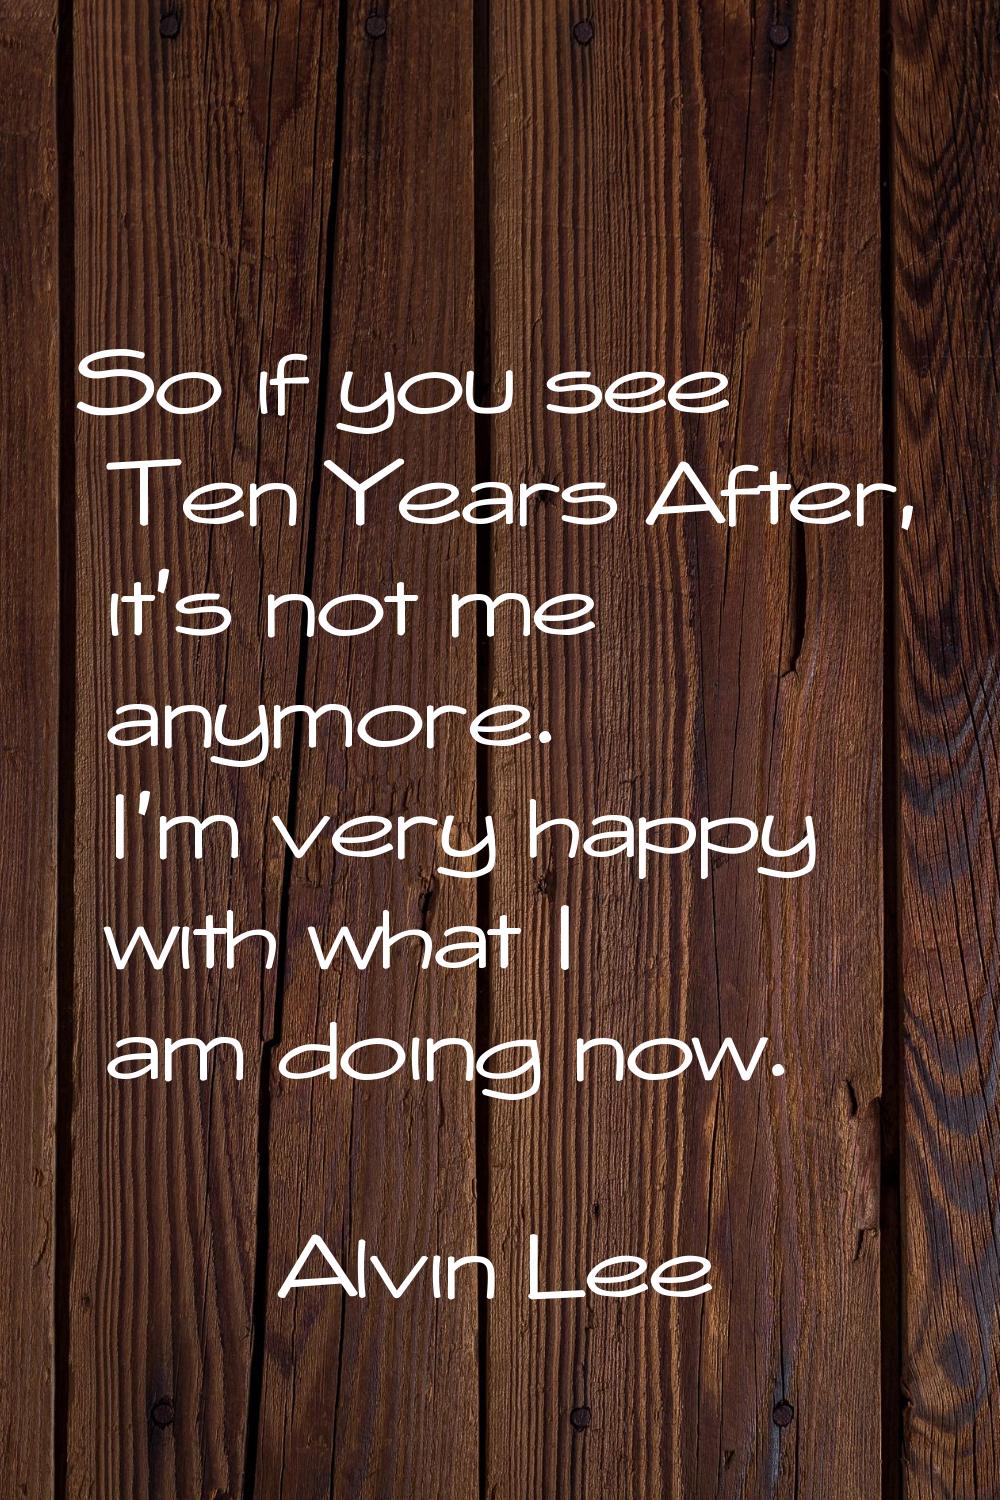 So if you see Ten Years After, it's not me anymore. I'm very happy with what I am doing now.